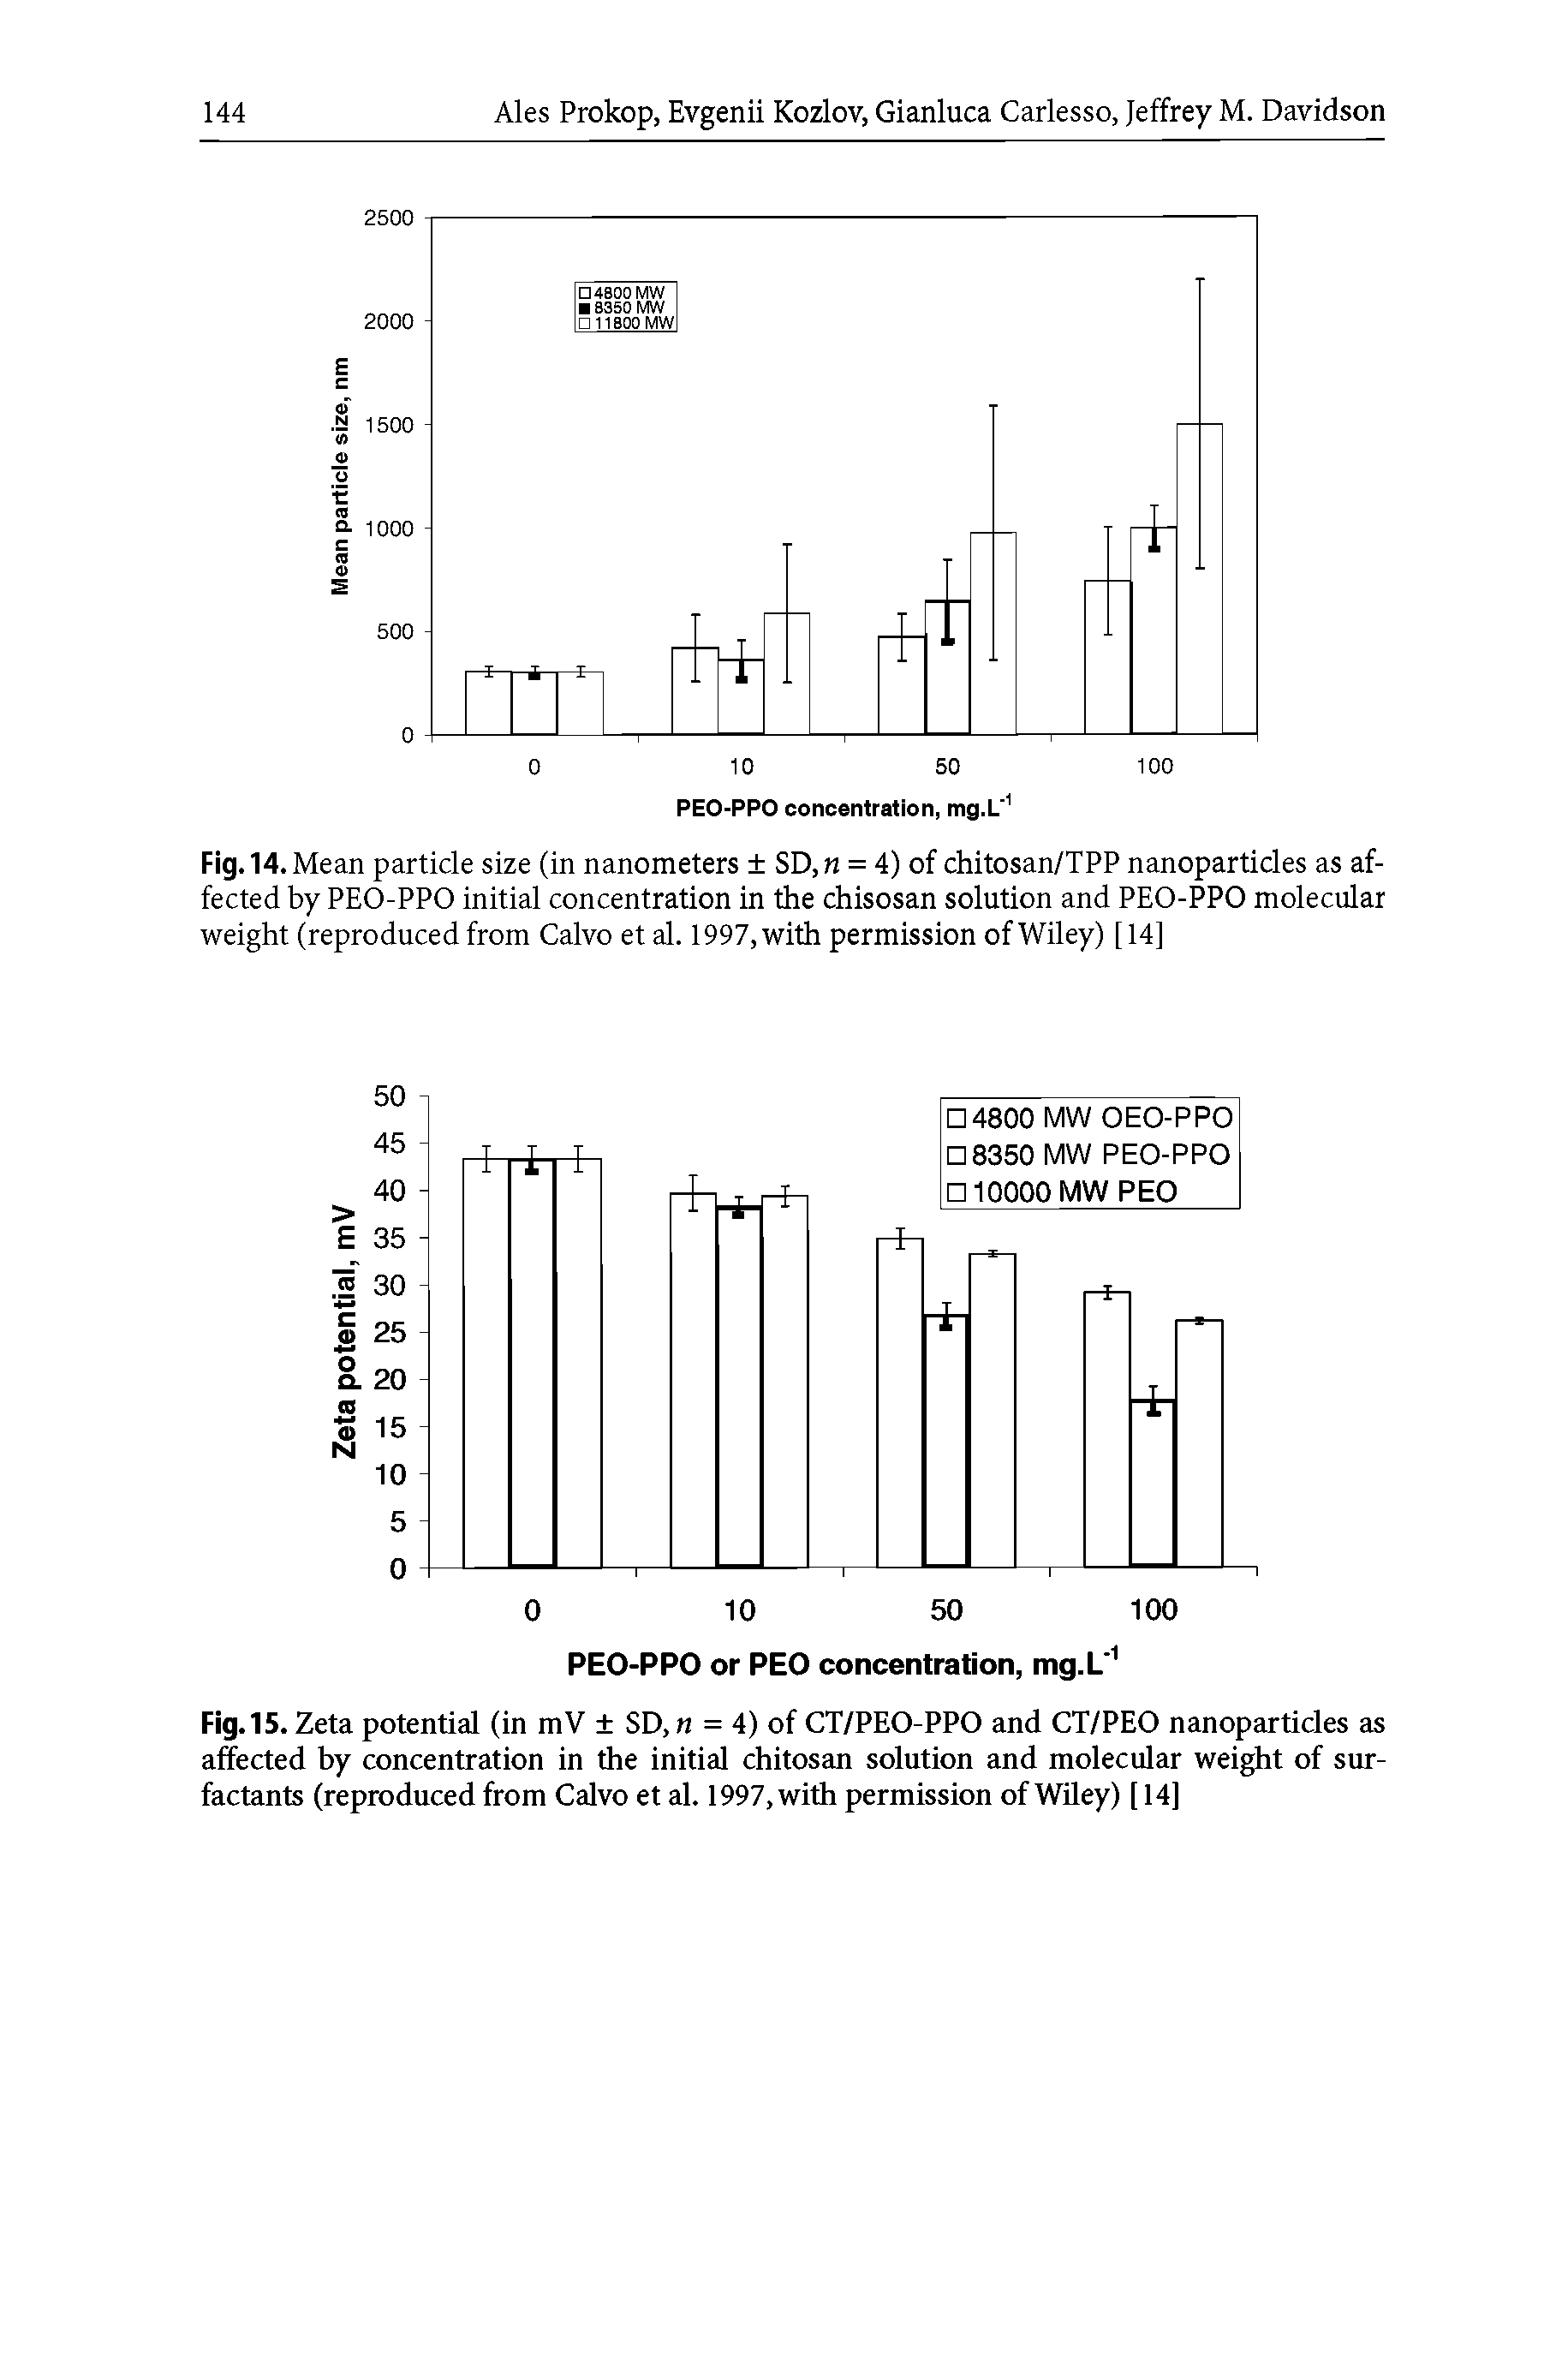 Fig. 15. Zeta potential (in mV SD, n = 4) of CT/PEO-PPO and CT/PEO nanoparticles as affected by concentration in the initial chitosan solution and molecular weight of surfactants (reproduced from Calvo et al. 1997, with permission of Wiley) [ 14]...